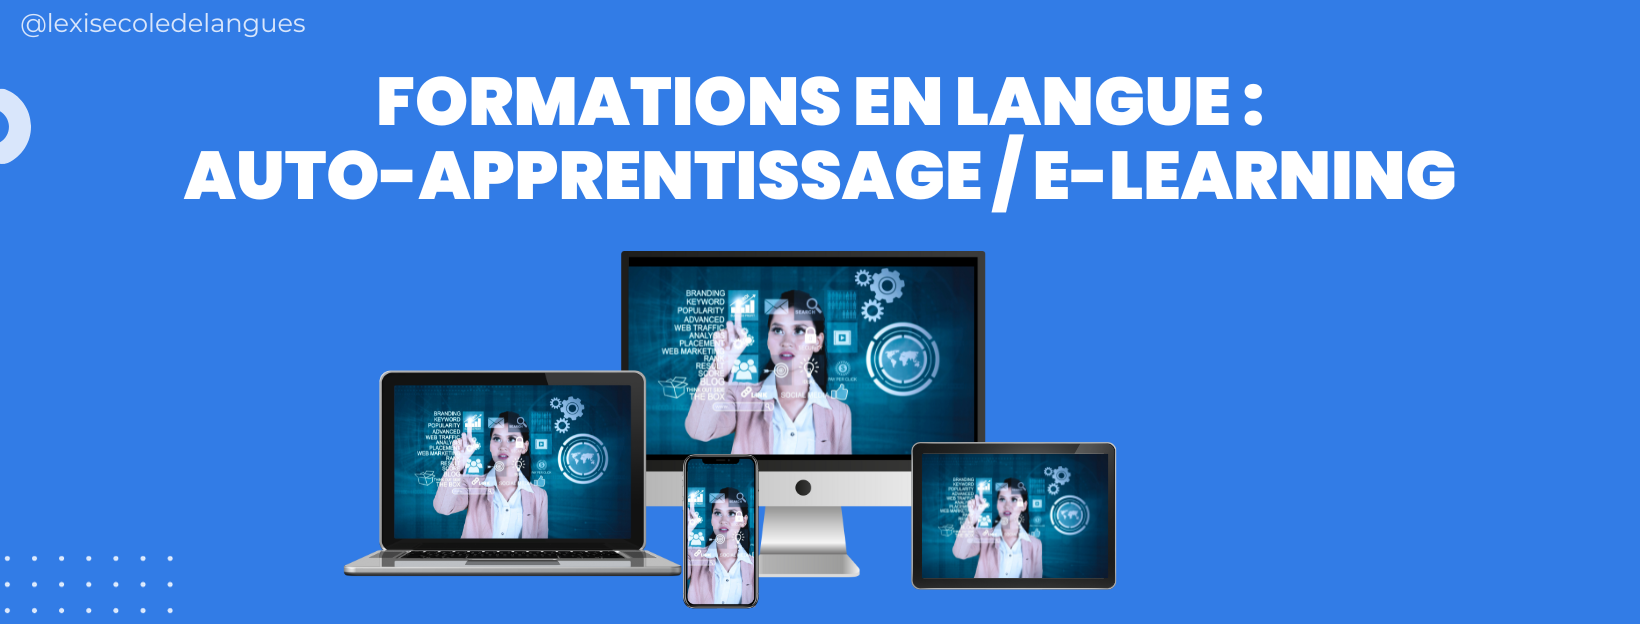 https://lexis-coursanglais.fr/elearning_banner.png